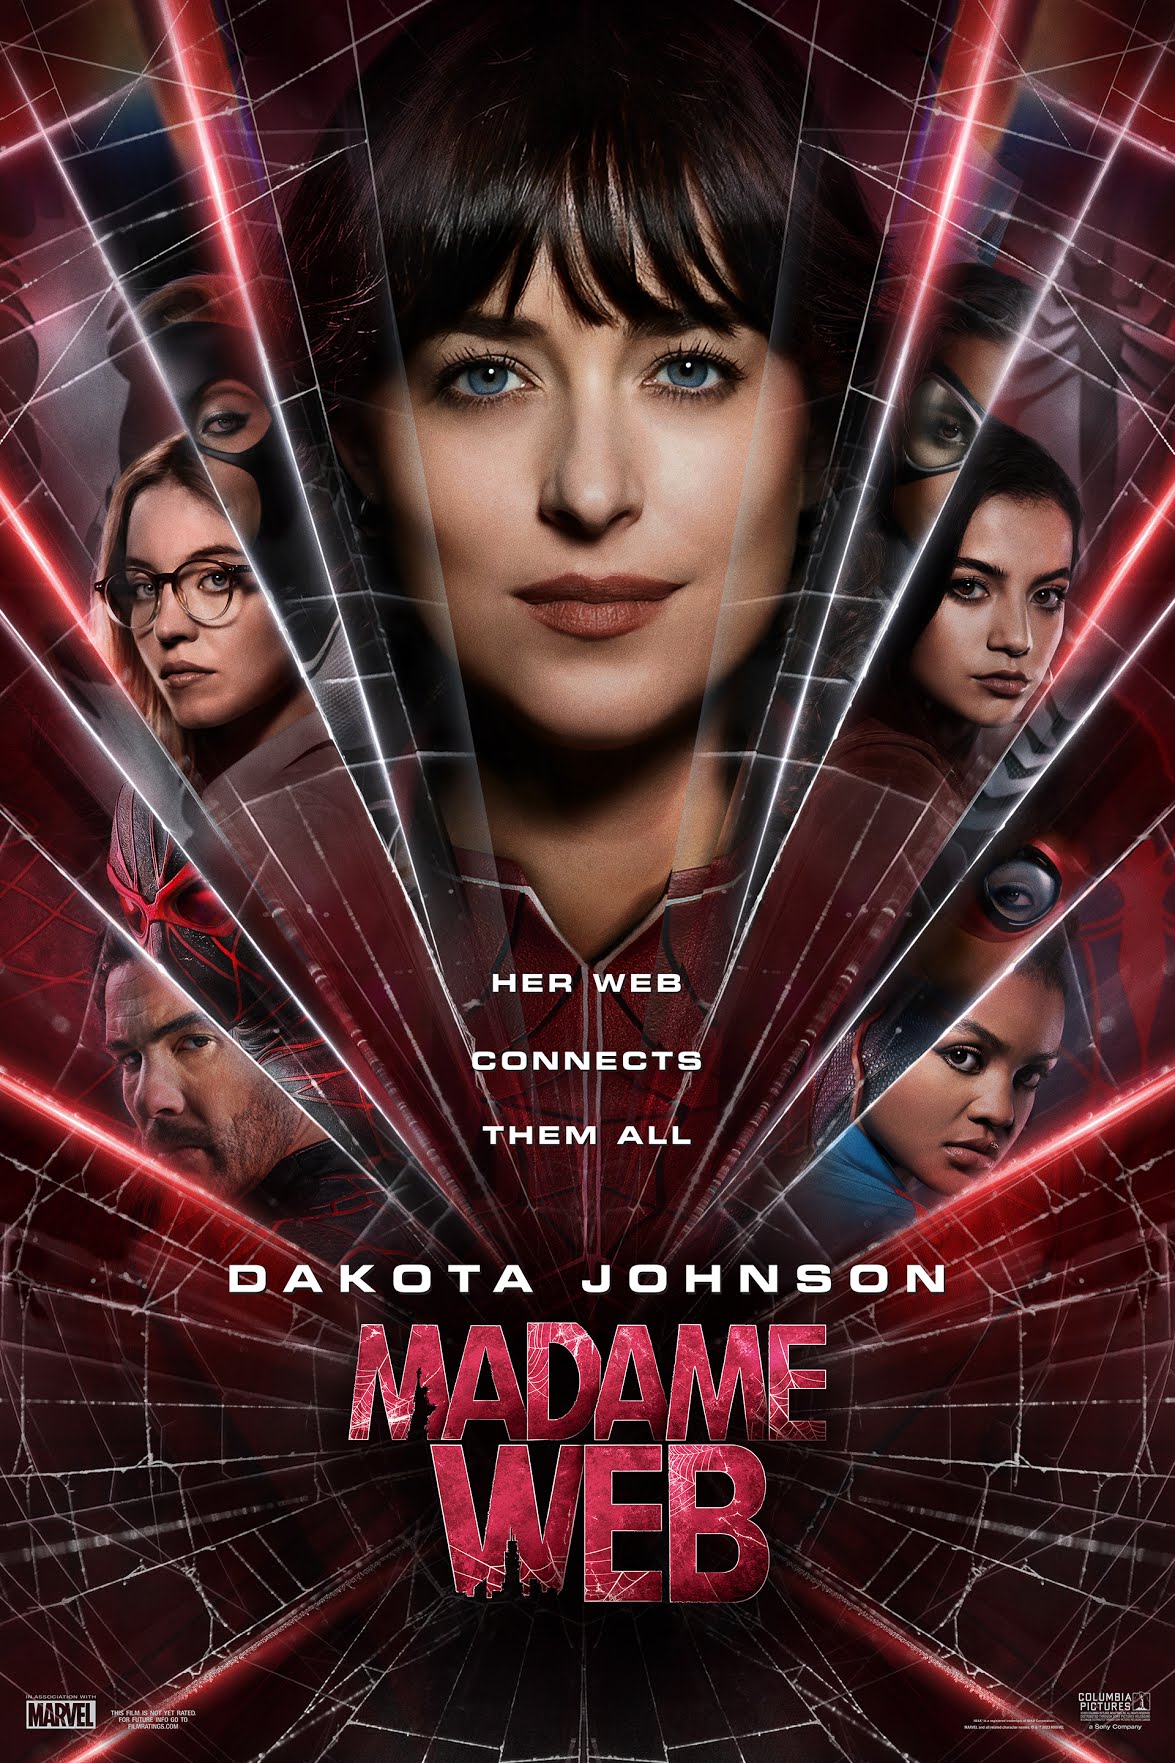 Madame Web is the next Spider-Man movie coming to theaters.